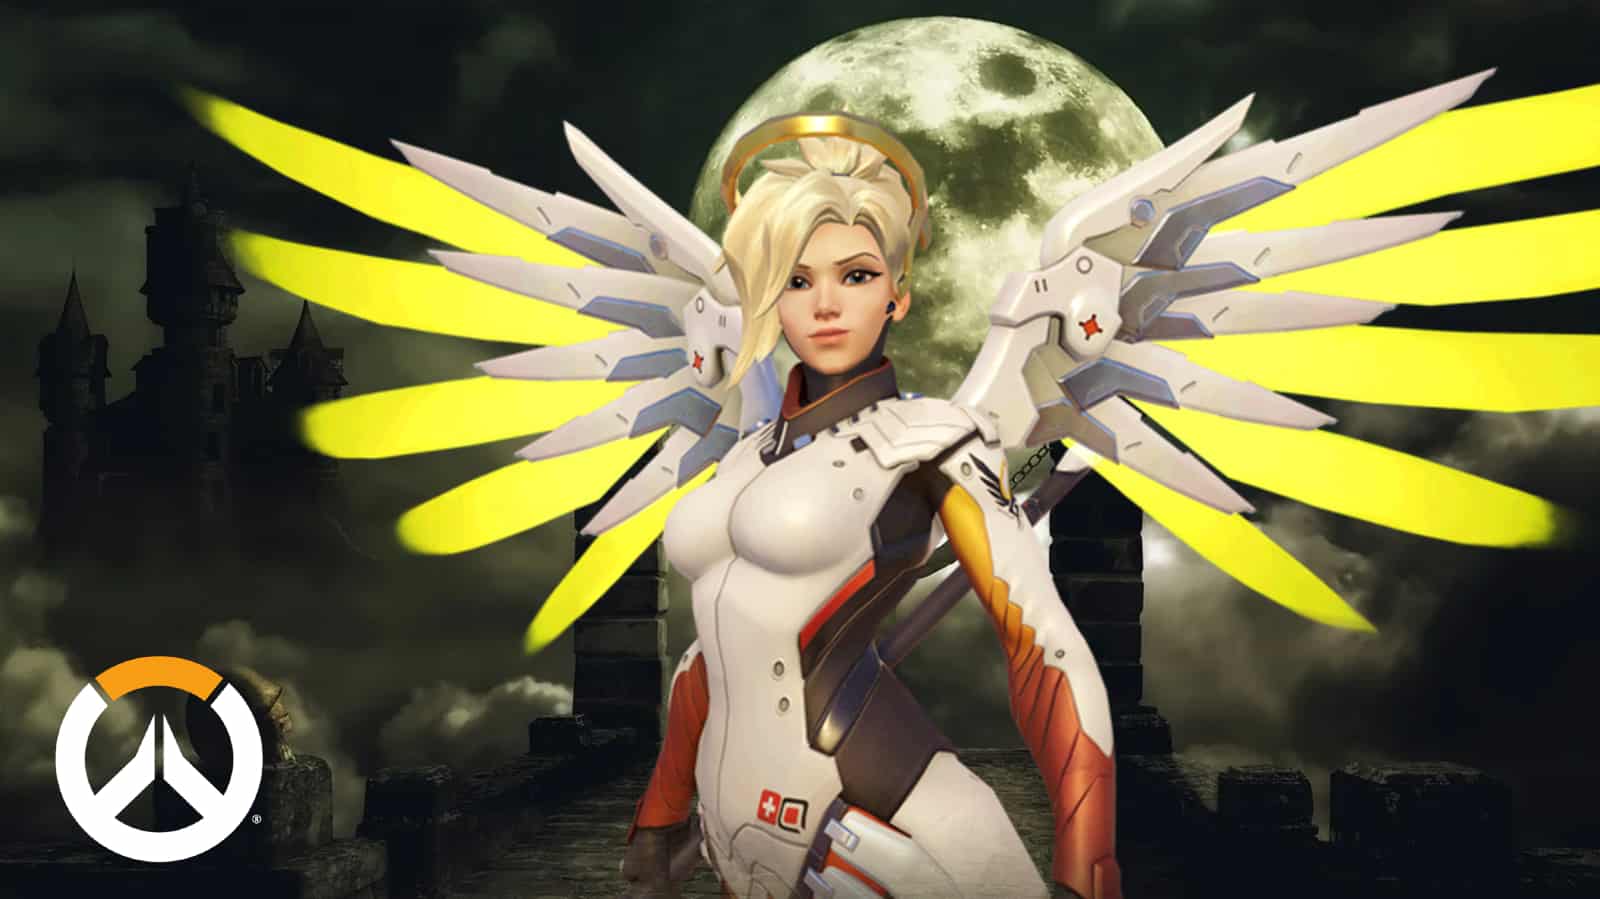 Overwatch Mercy against spooky moonlight background